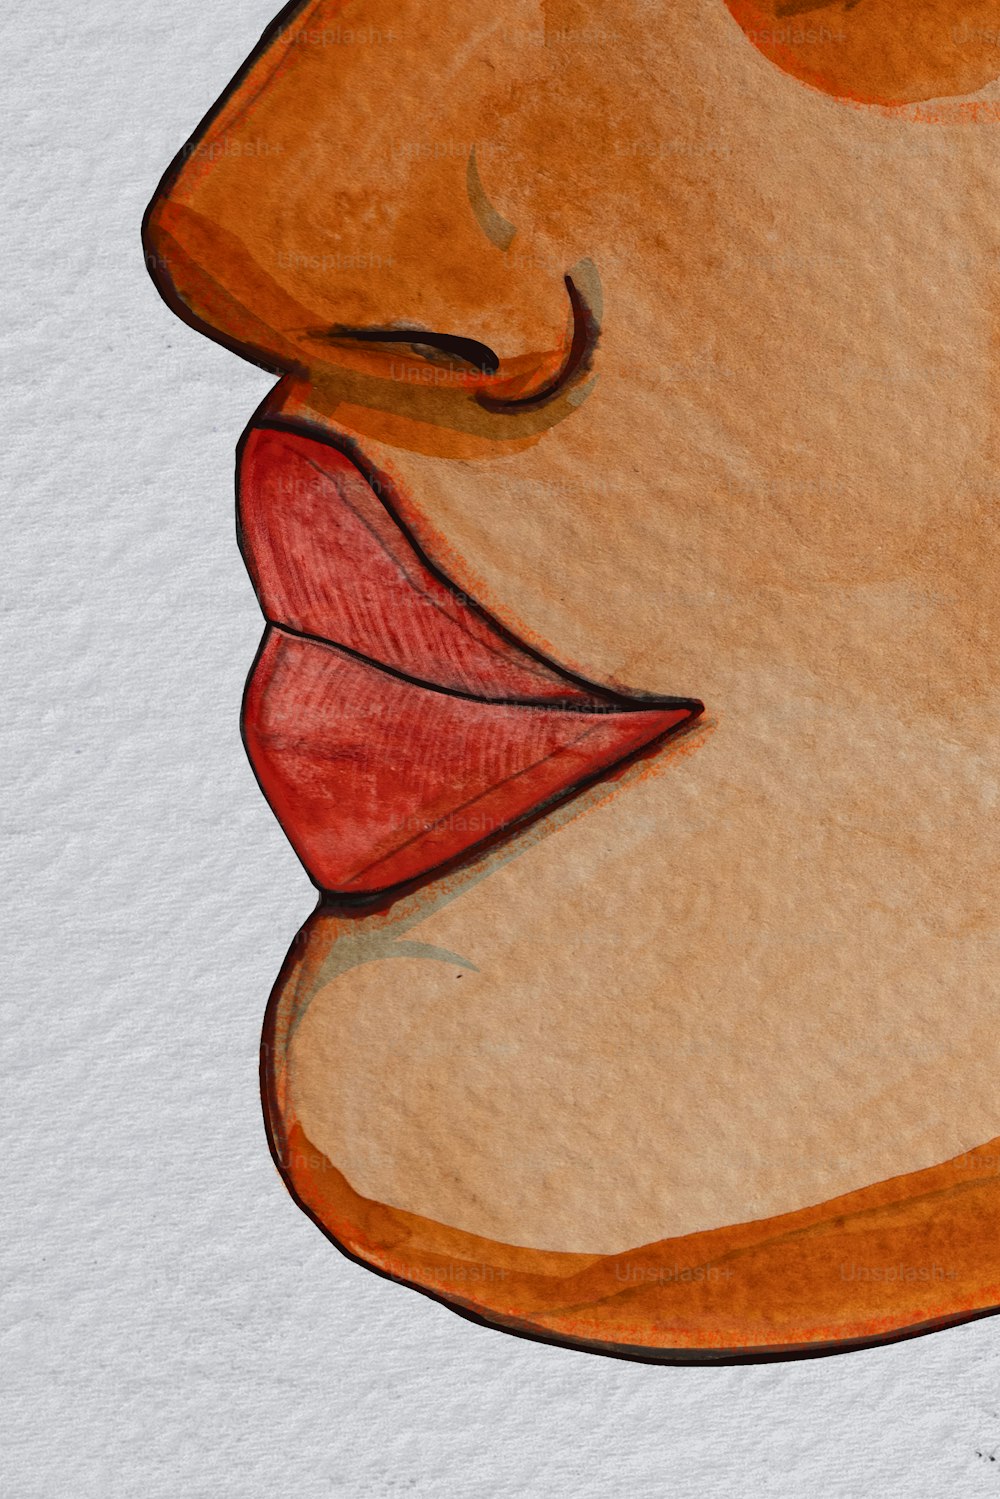 Illustration of  African woman's lips